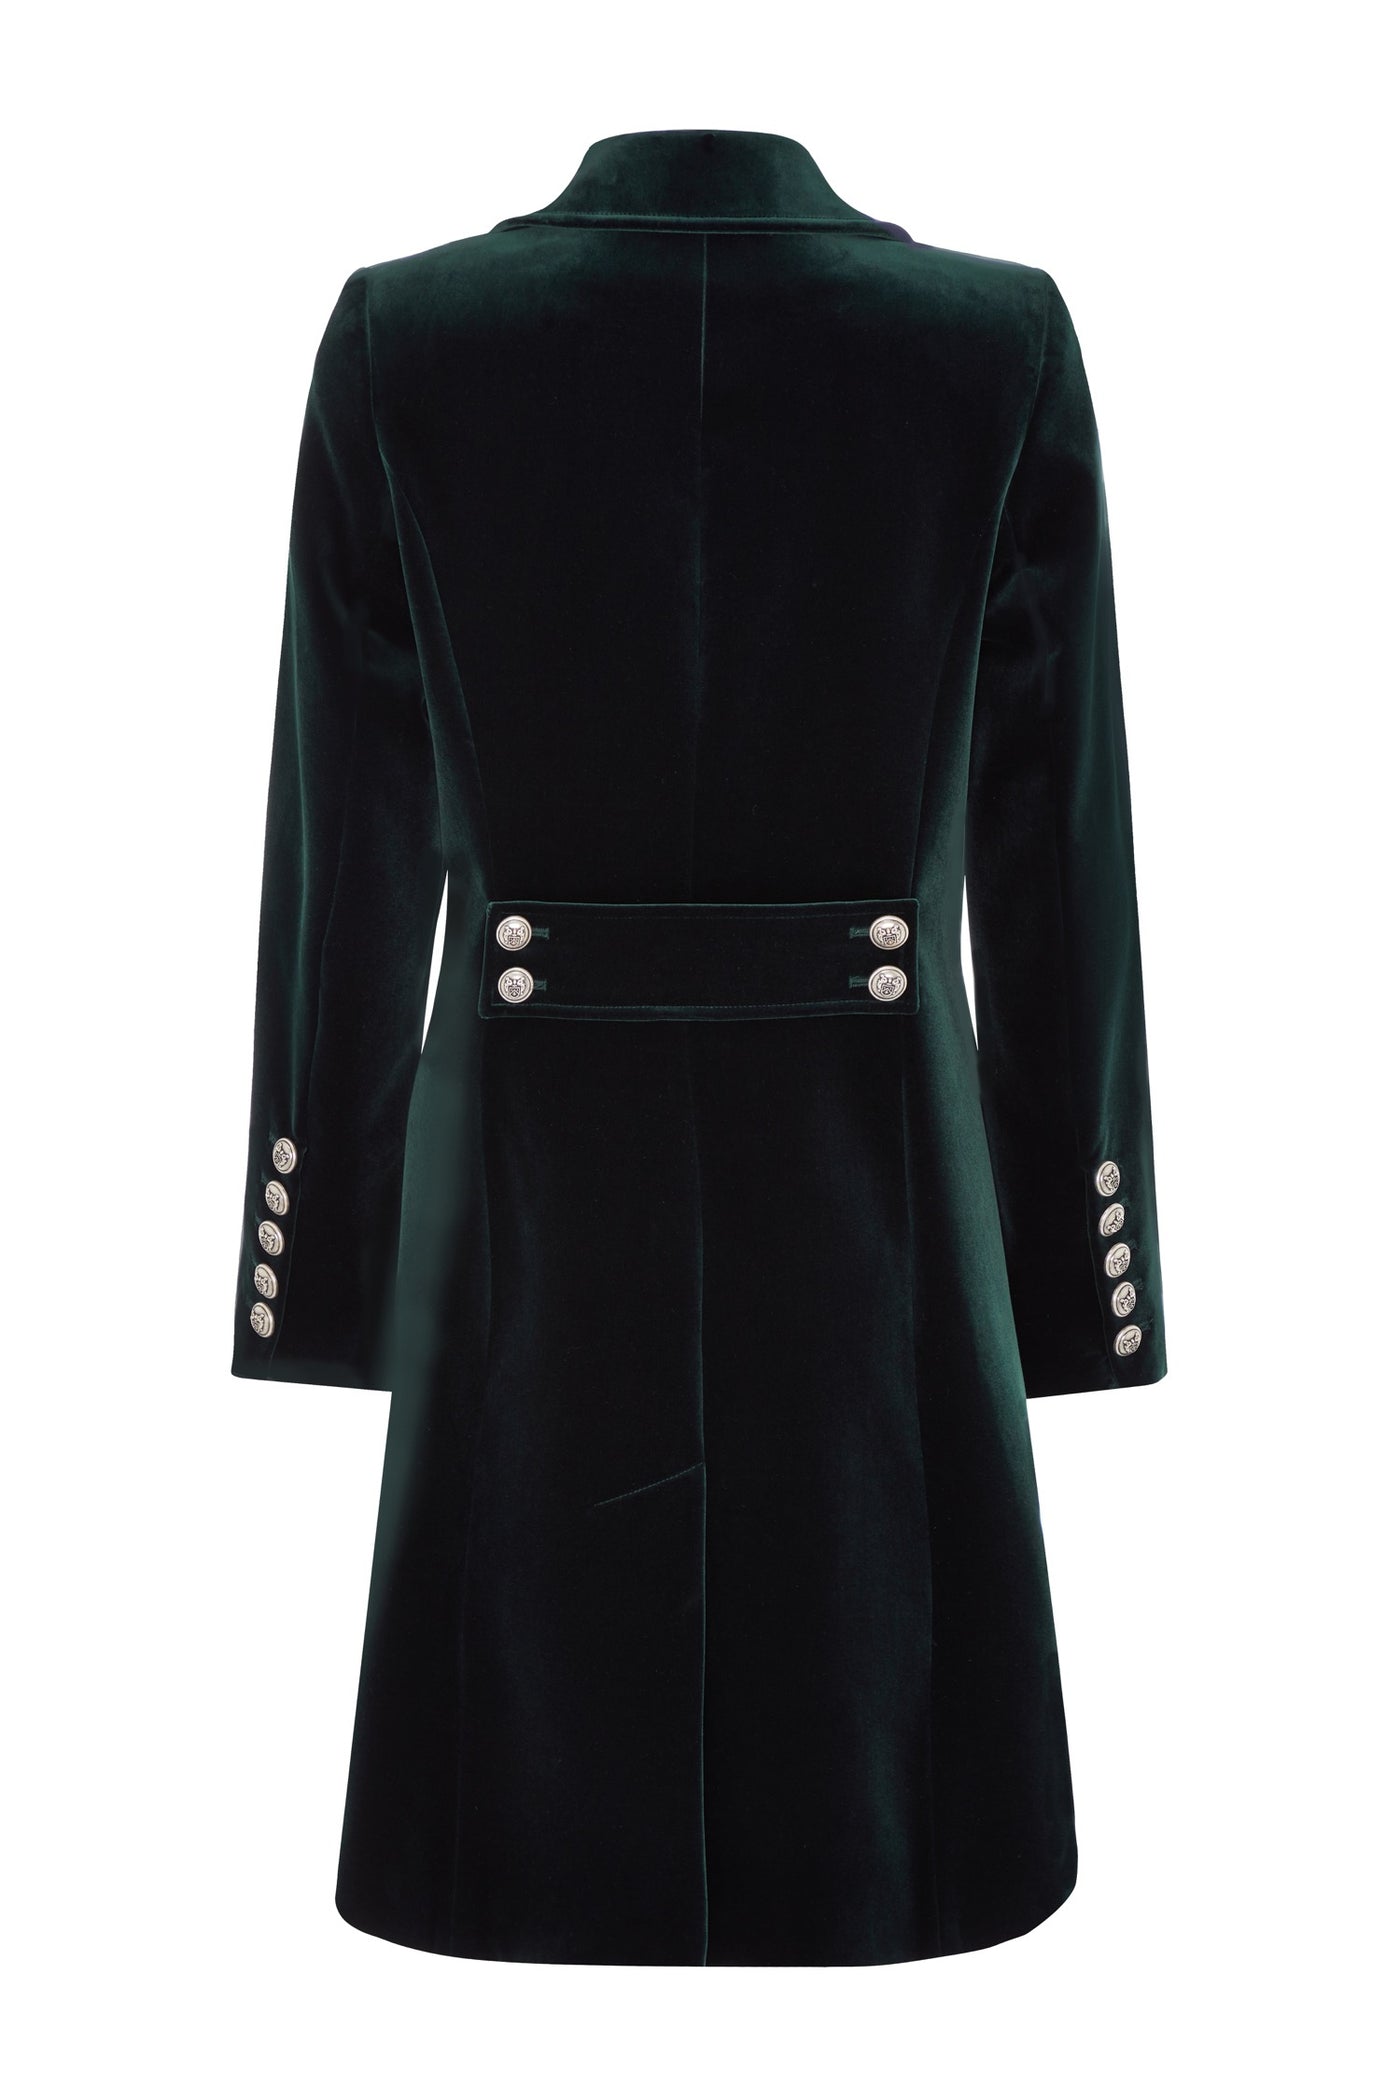 Back flat shot of a women's mid length coat in dark green velvet. The coat has a classic military style with double breasted silver buttons